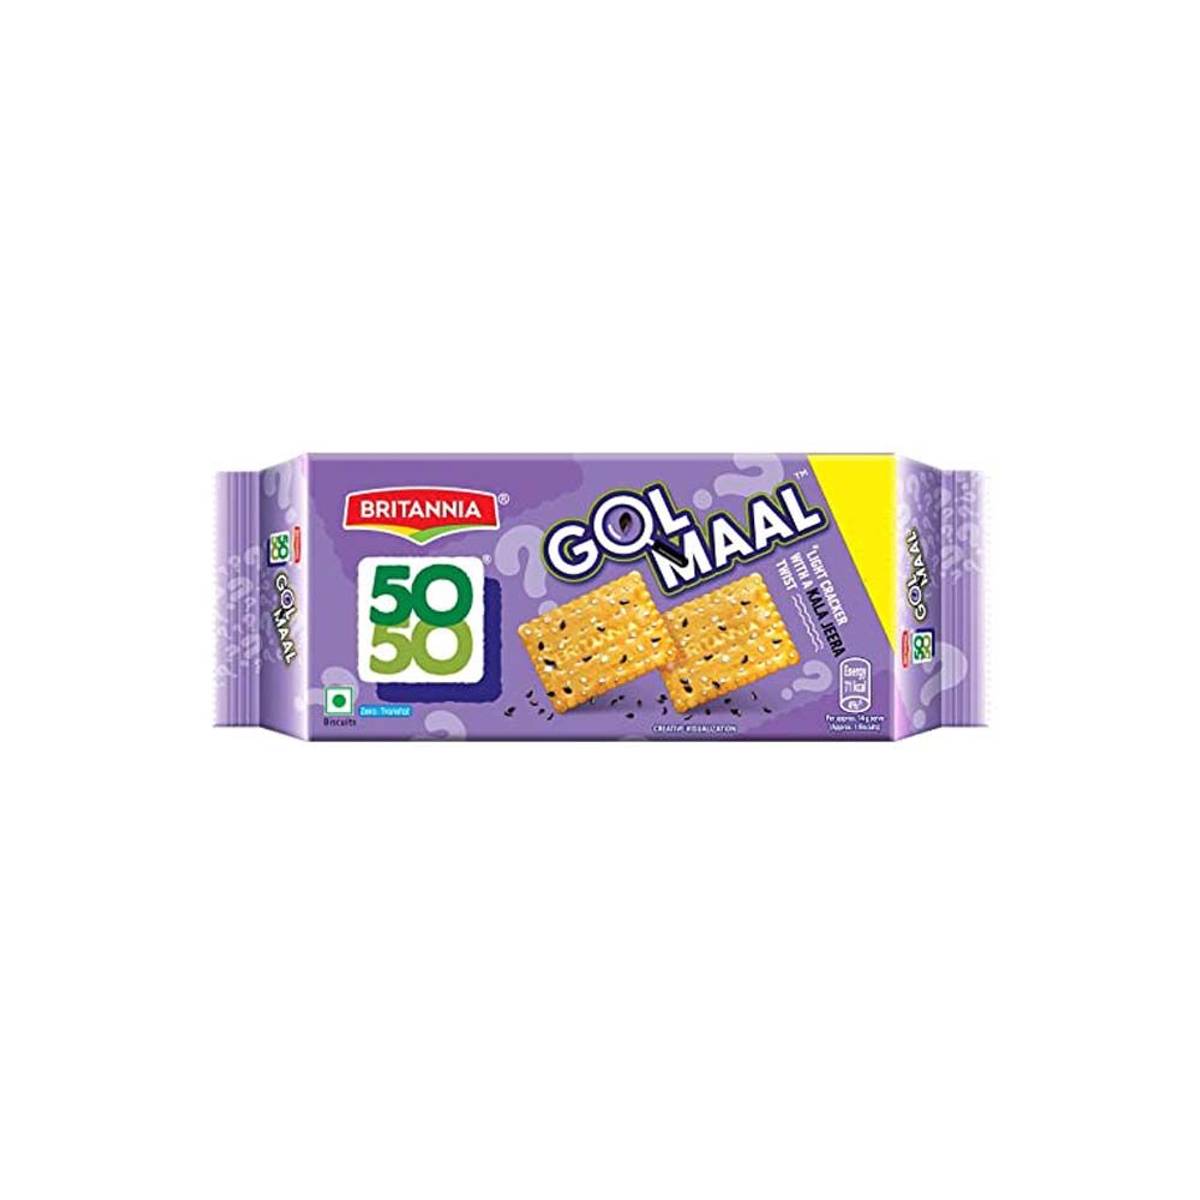 Baked Biscuits Cream and Onion Style Britannia 50 50 Maska Chaska Biscuit,  Packaging Type: Packet